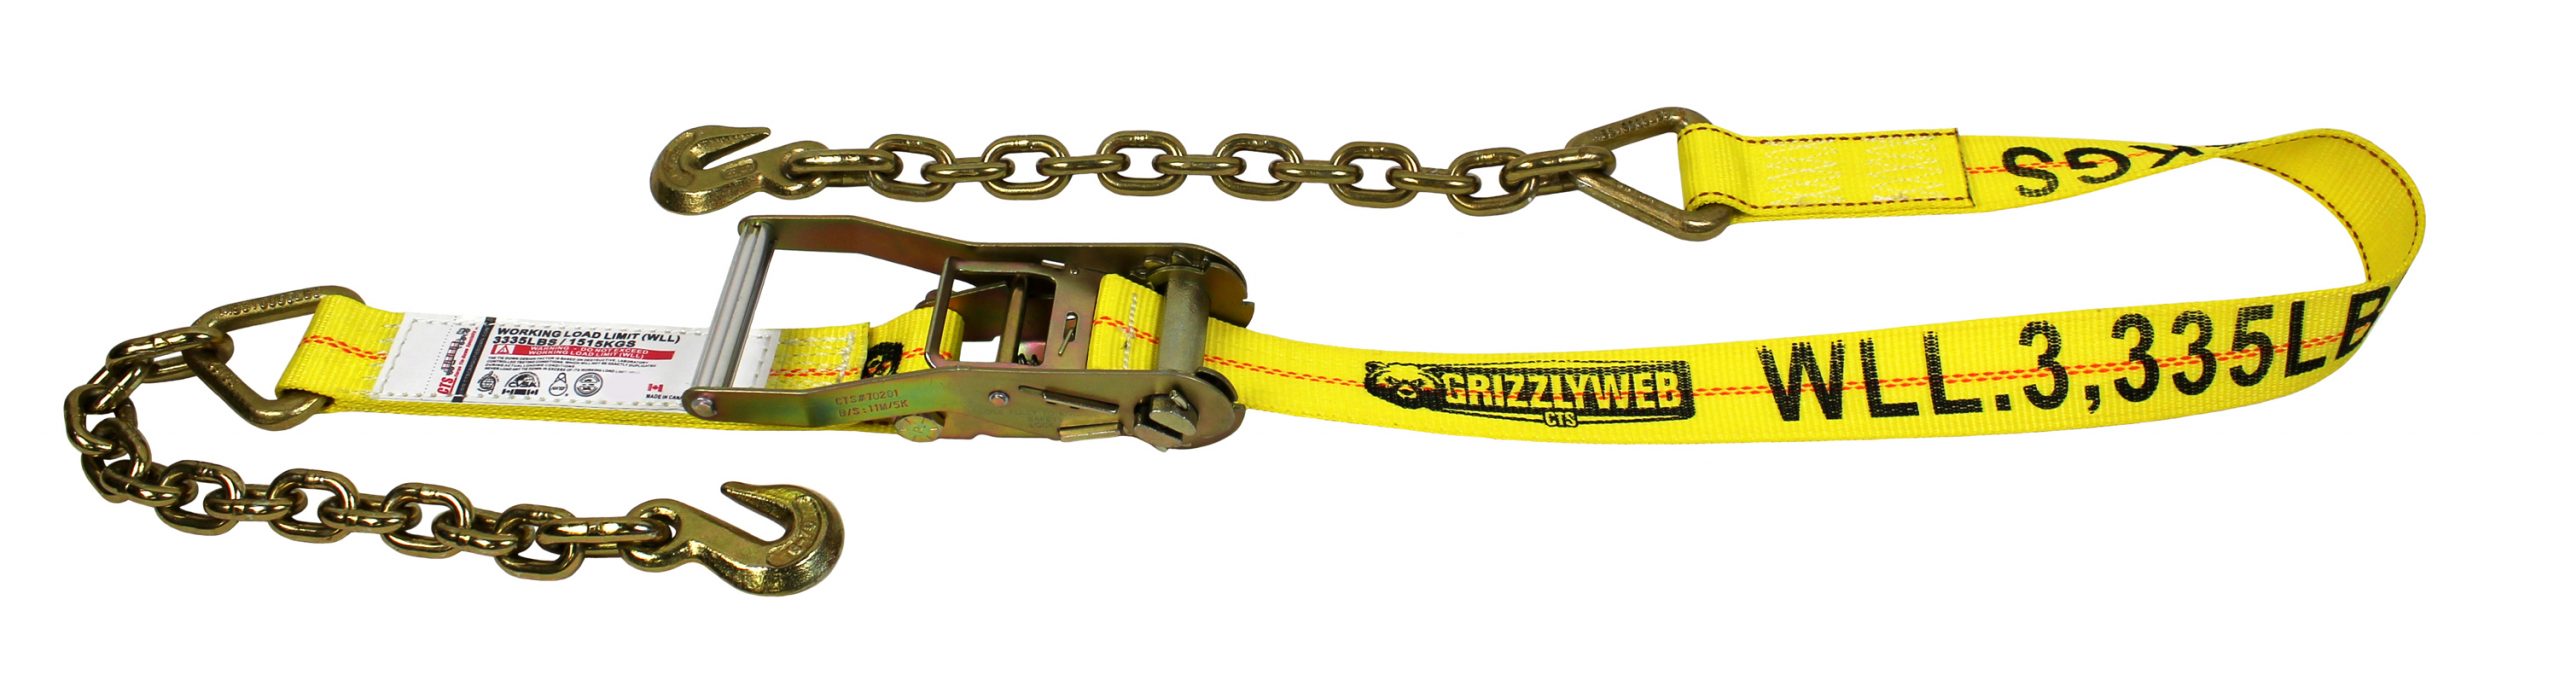 HEAVY DUTY RATCHET STRAP WITH CHAIN ANCHOR